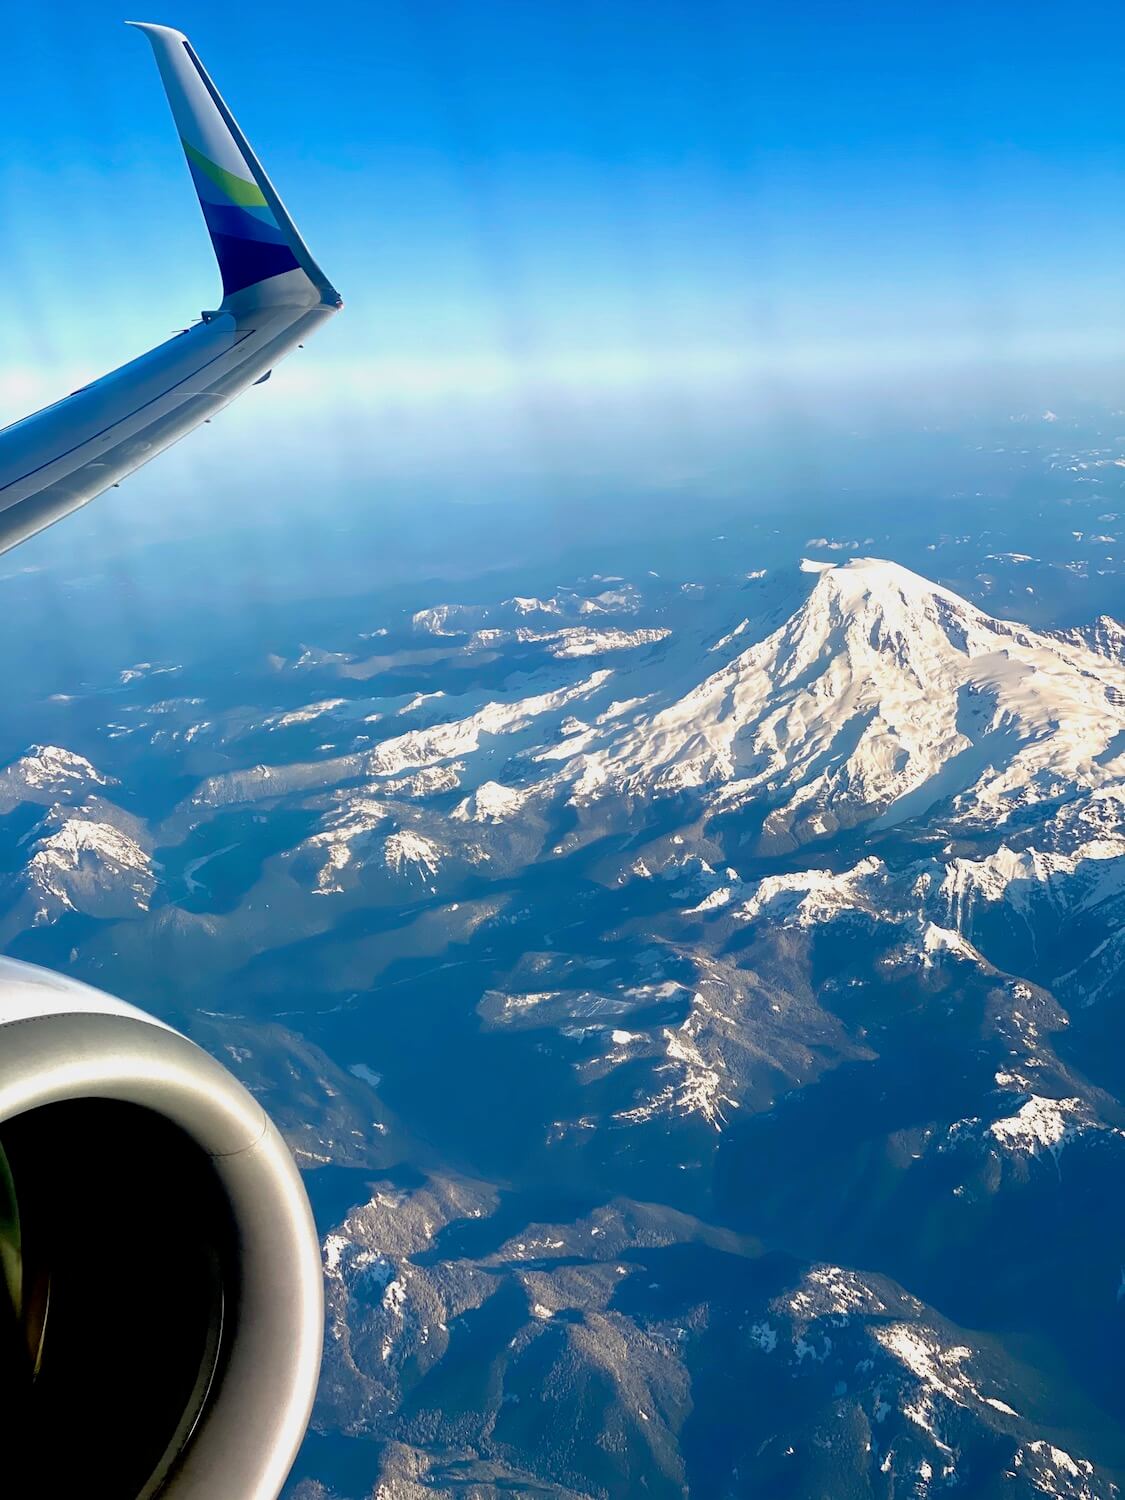 An Alaska Airlines flight to Portland from Seattle highlights majestic Mt. Rainier, covered with a heavy layer of white snow.  The winglet of the jet airplane shows the green and blues of the airline log while the sky and horizon are blue. 